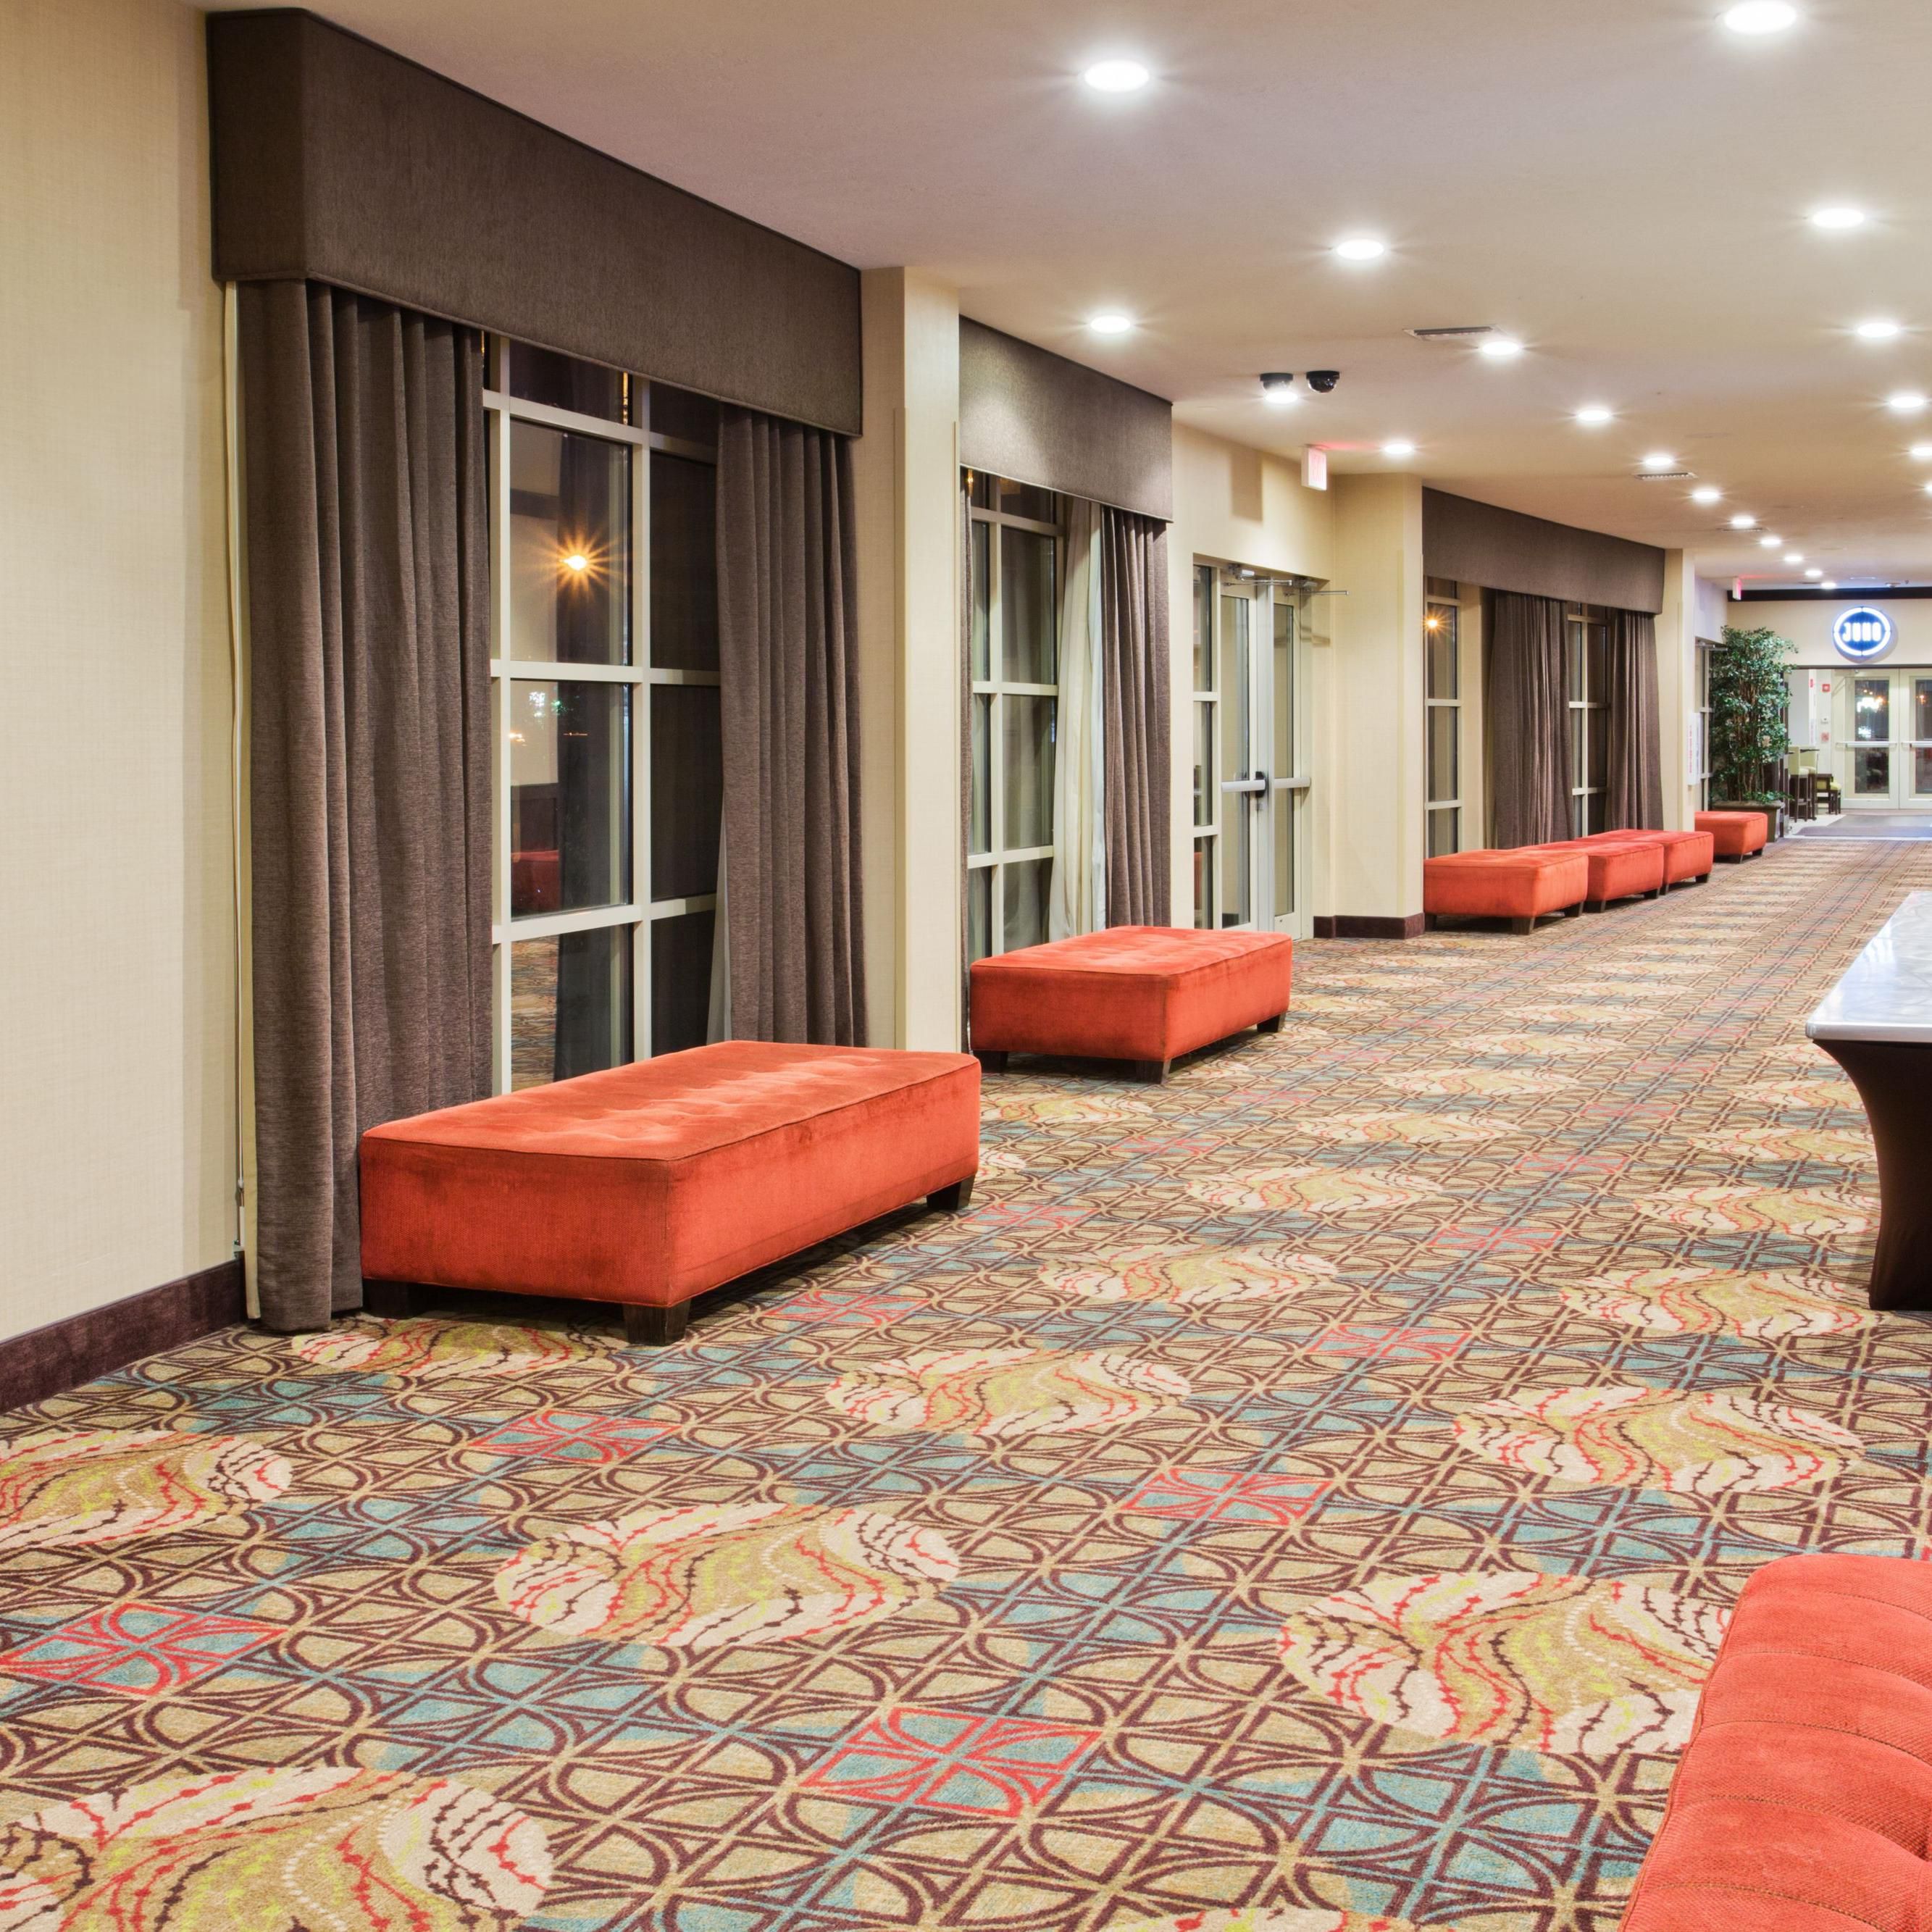 Our spacious pre-function area is perfect for a breakfast buffet